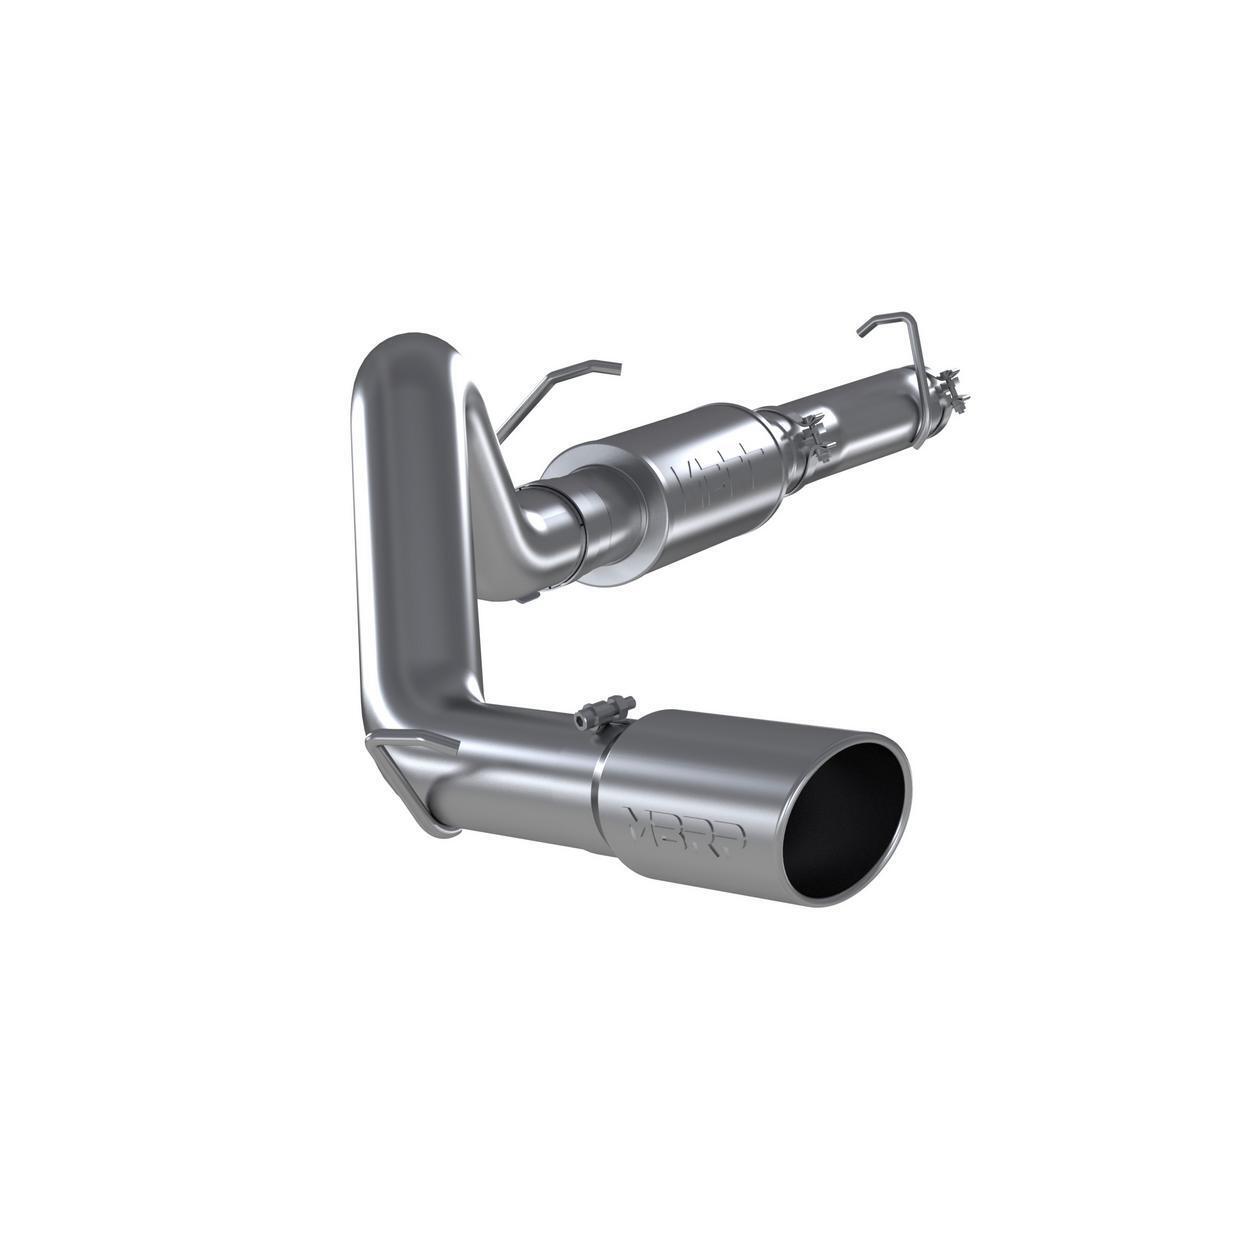 MBRP Exhaust System Kit for 2004-2007 Ford E-350 Super Duty